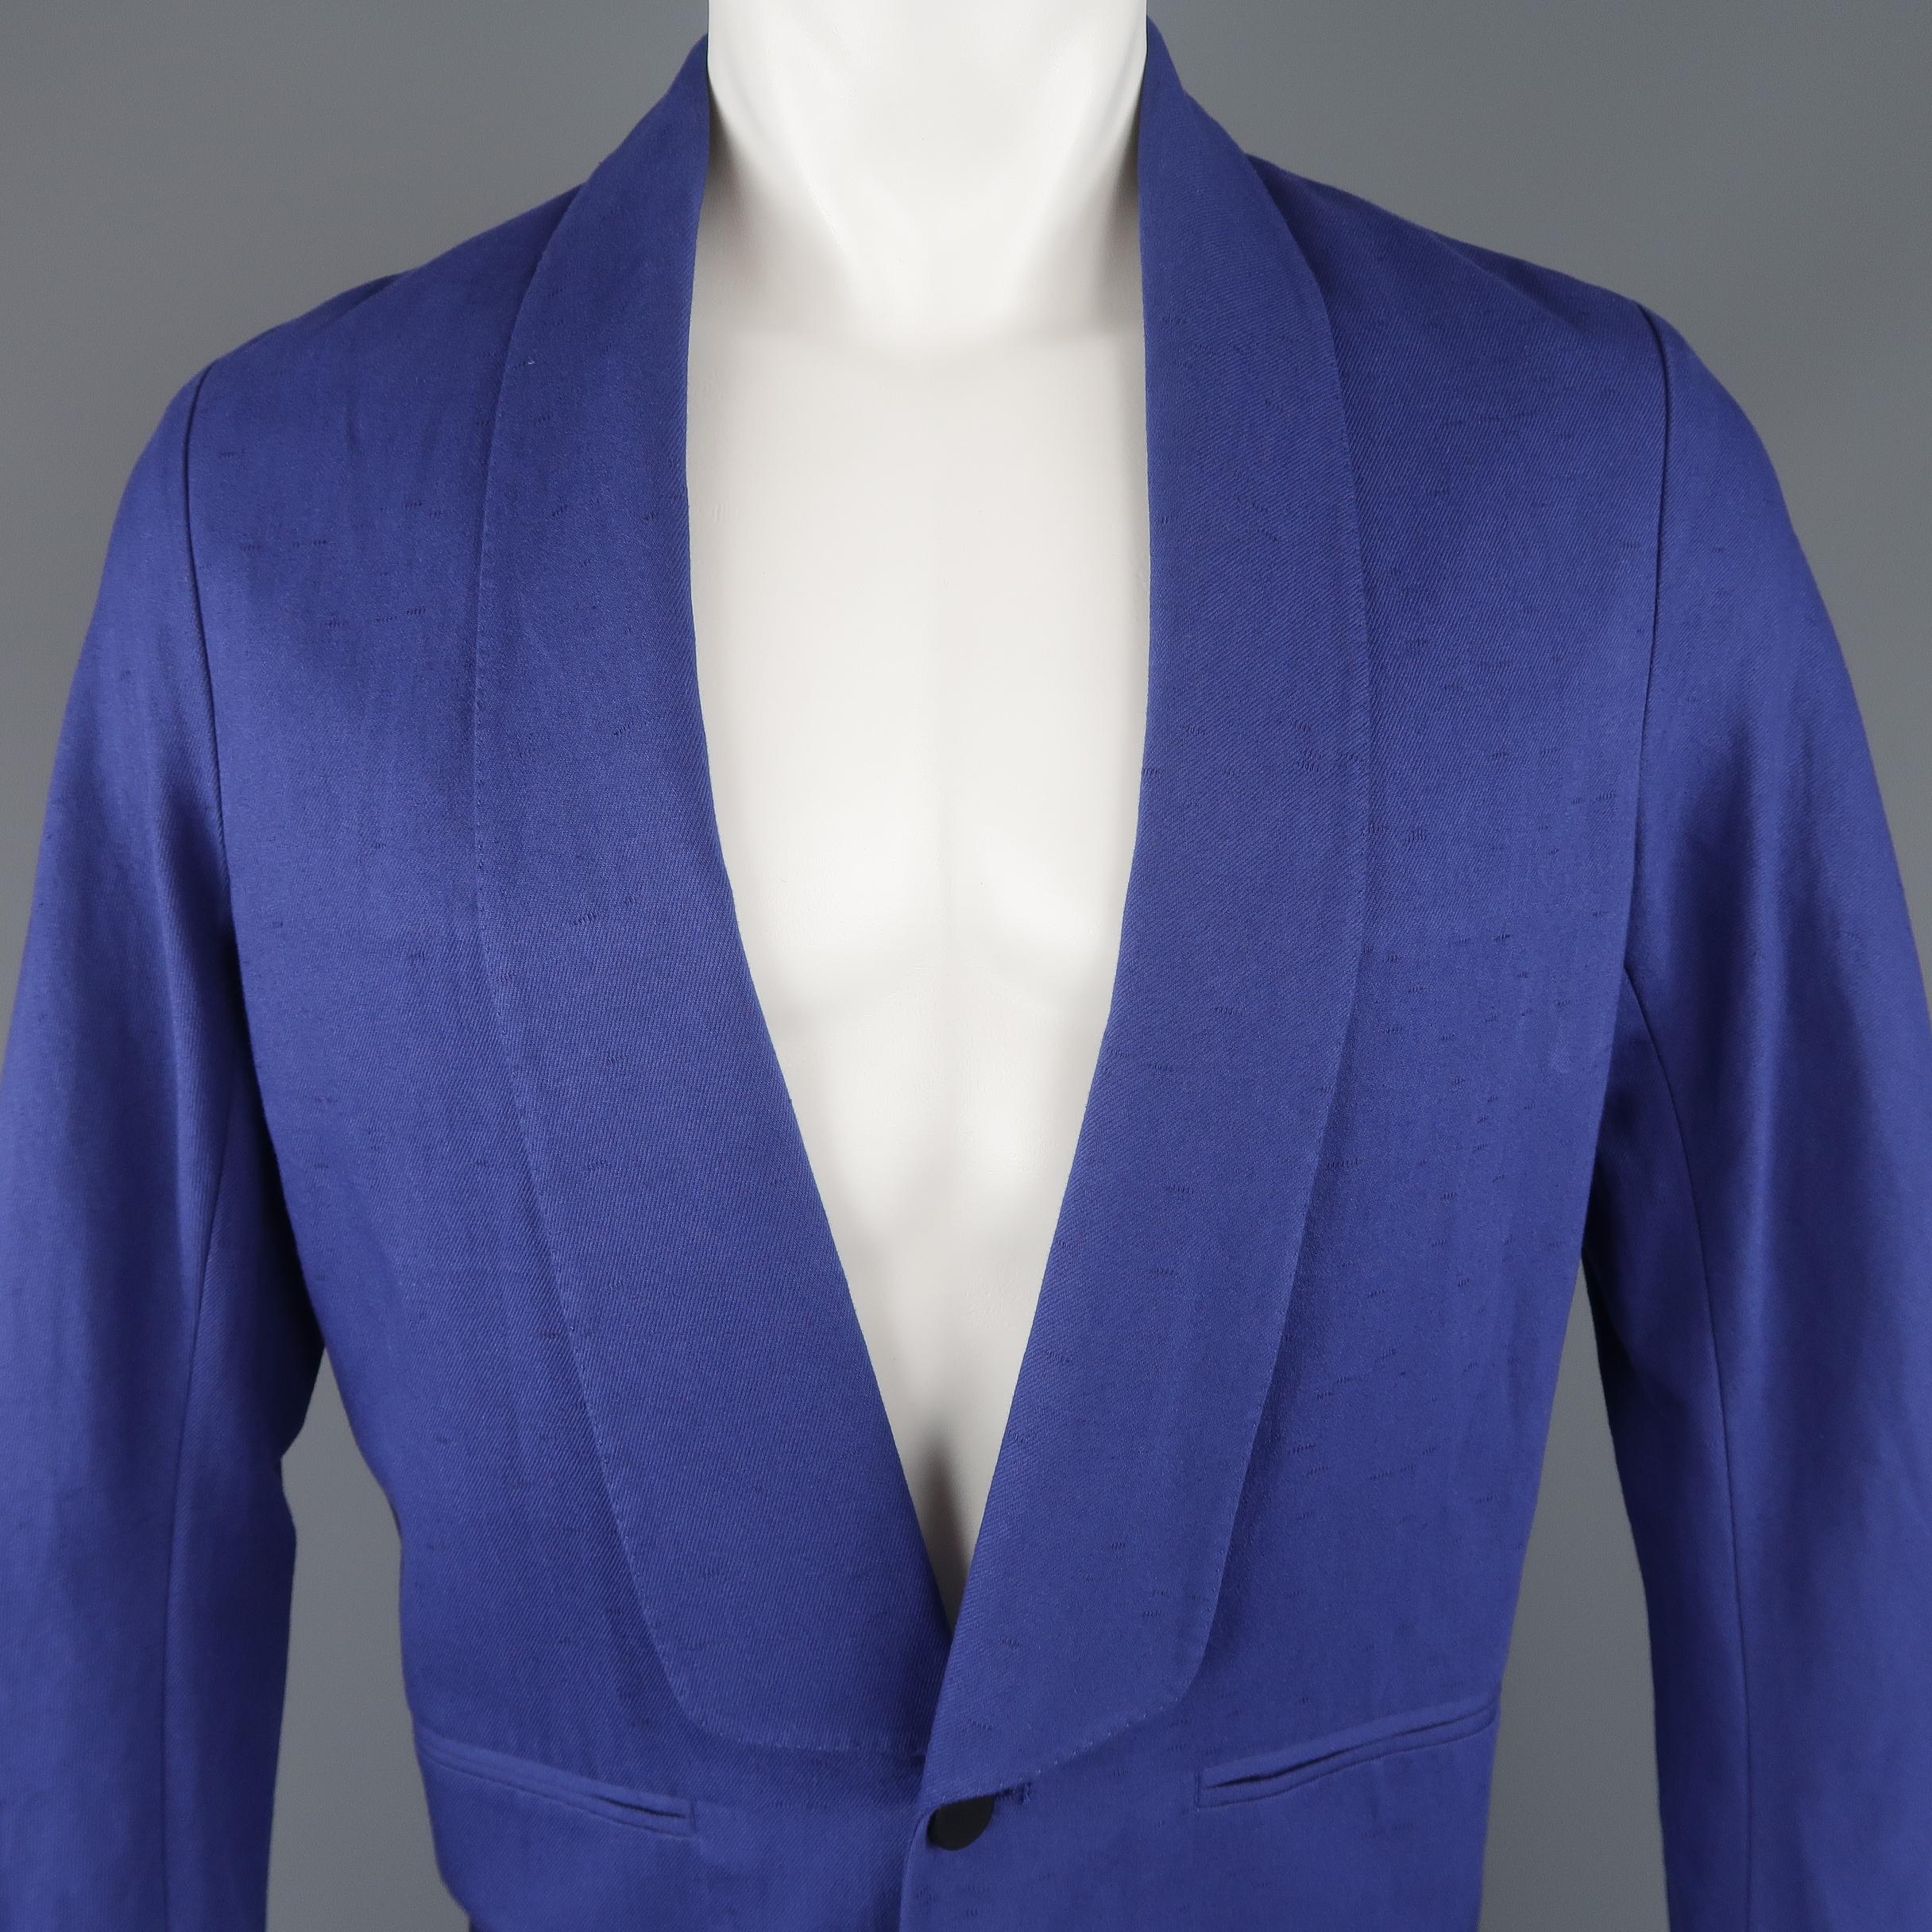 PHILLIP LIM sport coat jacket comes in blue cotton linen blend textured twill with a shawl collar and and single rubberized button.
 
New without Tags
Marked: XS
 
Measurements:
 
Shoulder: 17 in.
Chest: 40 in.
Sleeve: 19 in.
Length: 27 in.